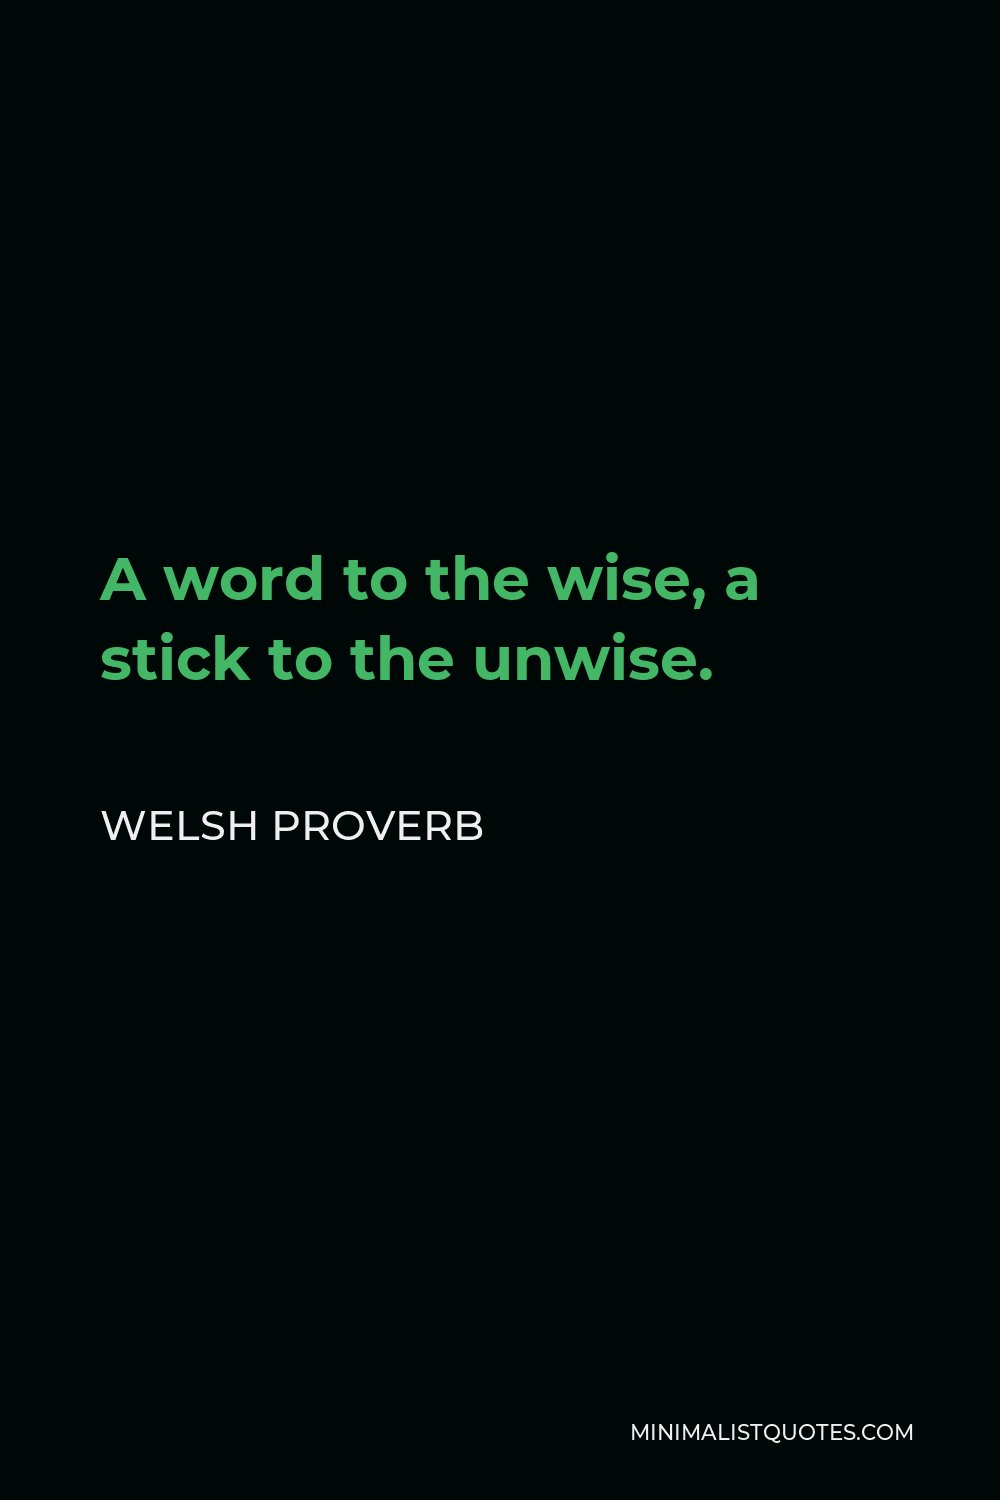 Welsh Proverb Quote - A word to the wise, a stick to the unwise.